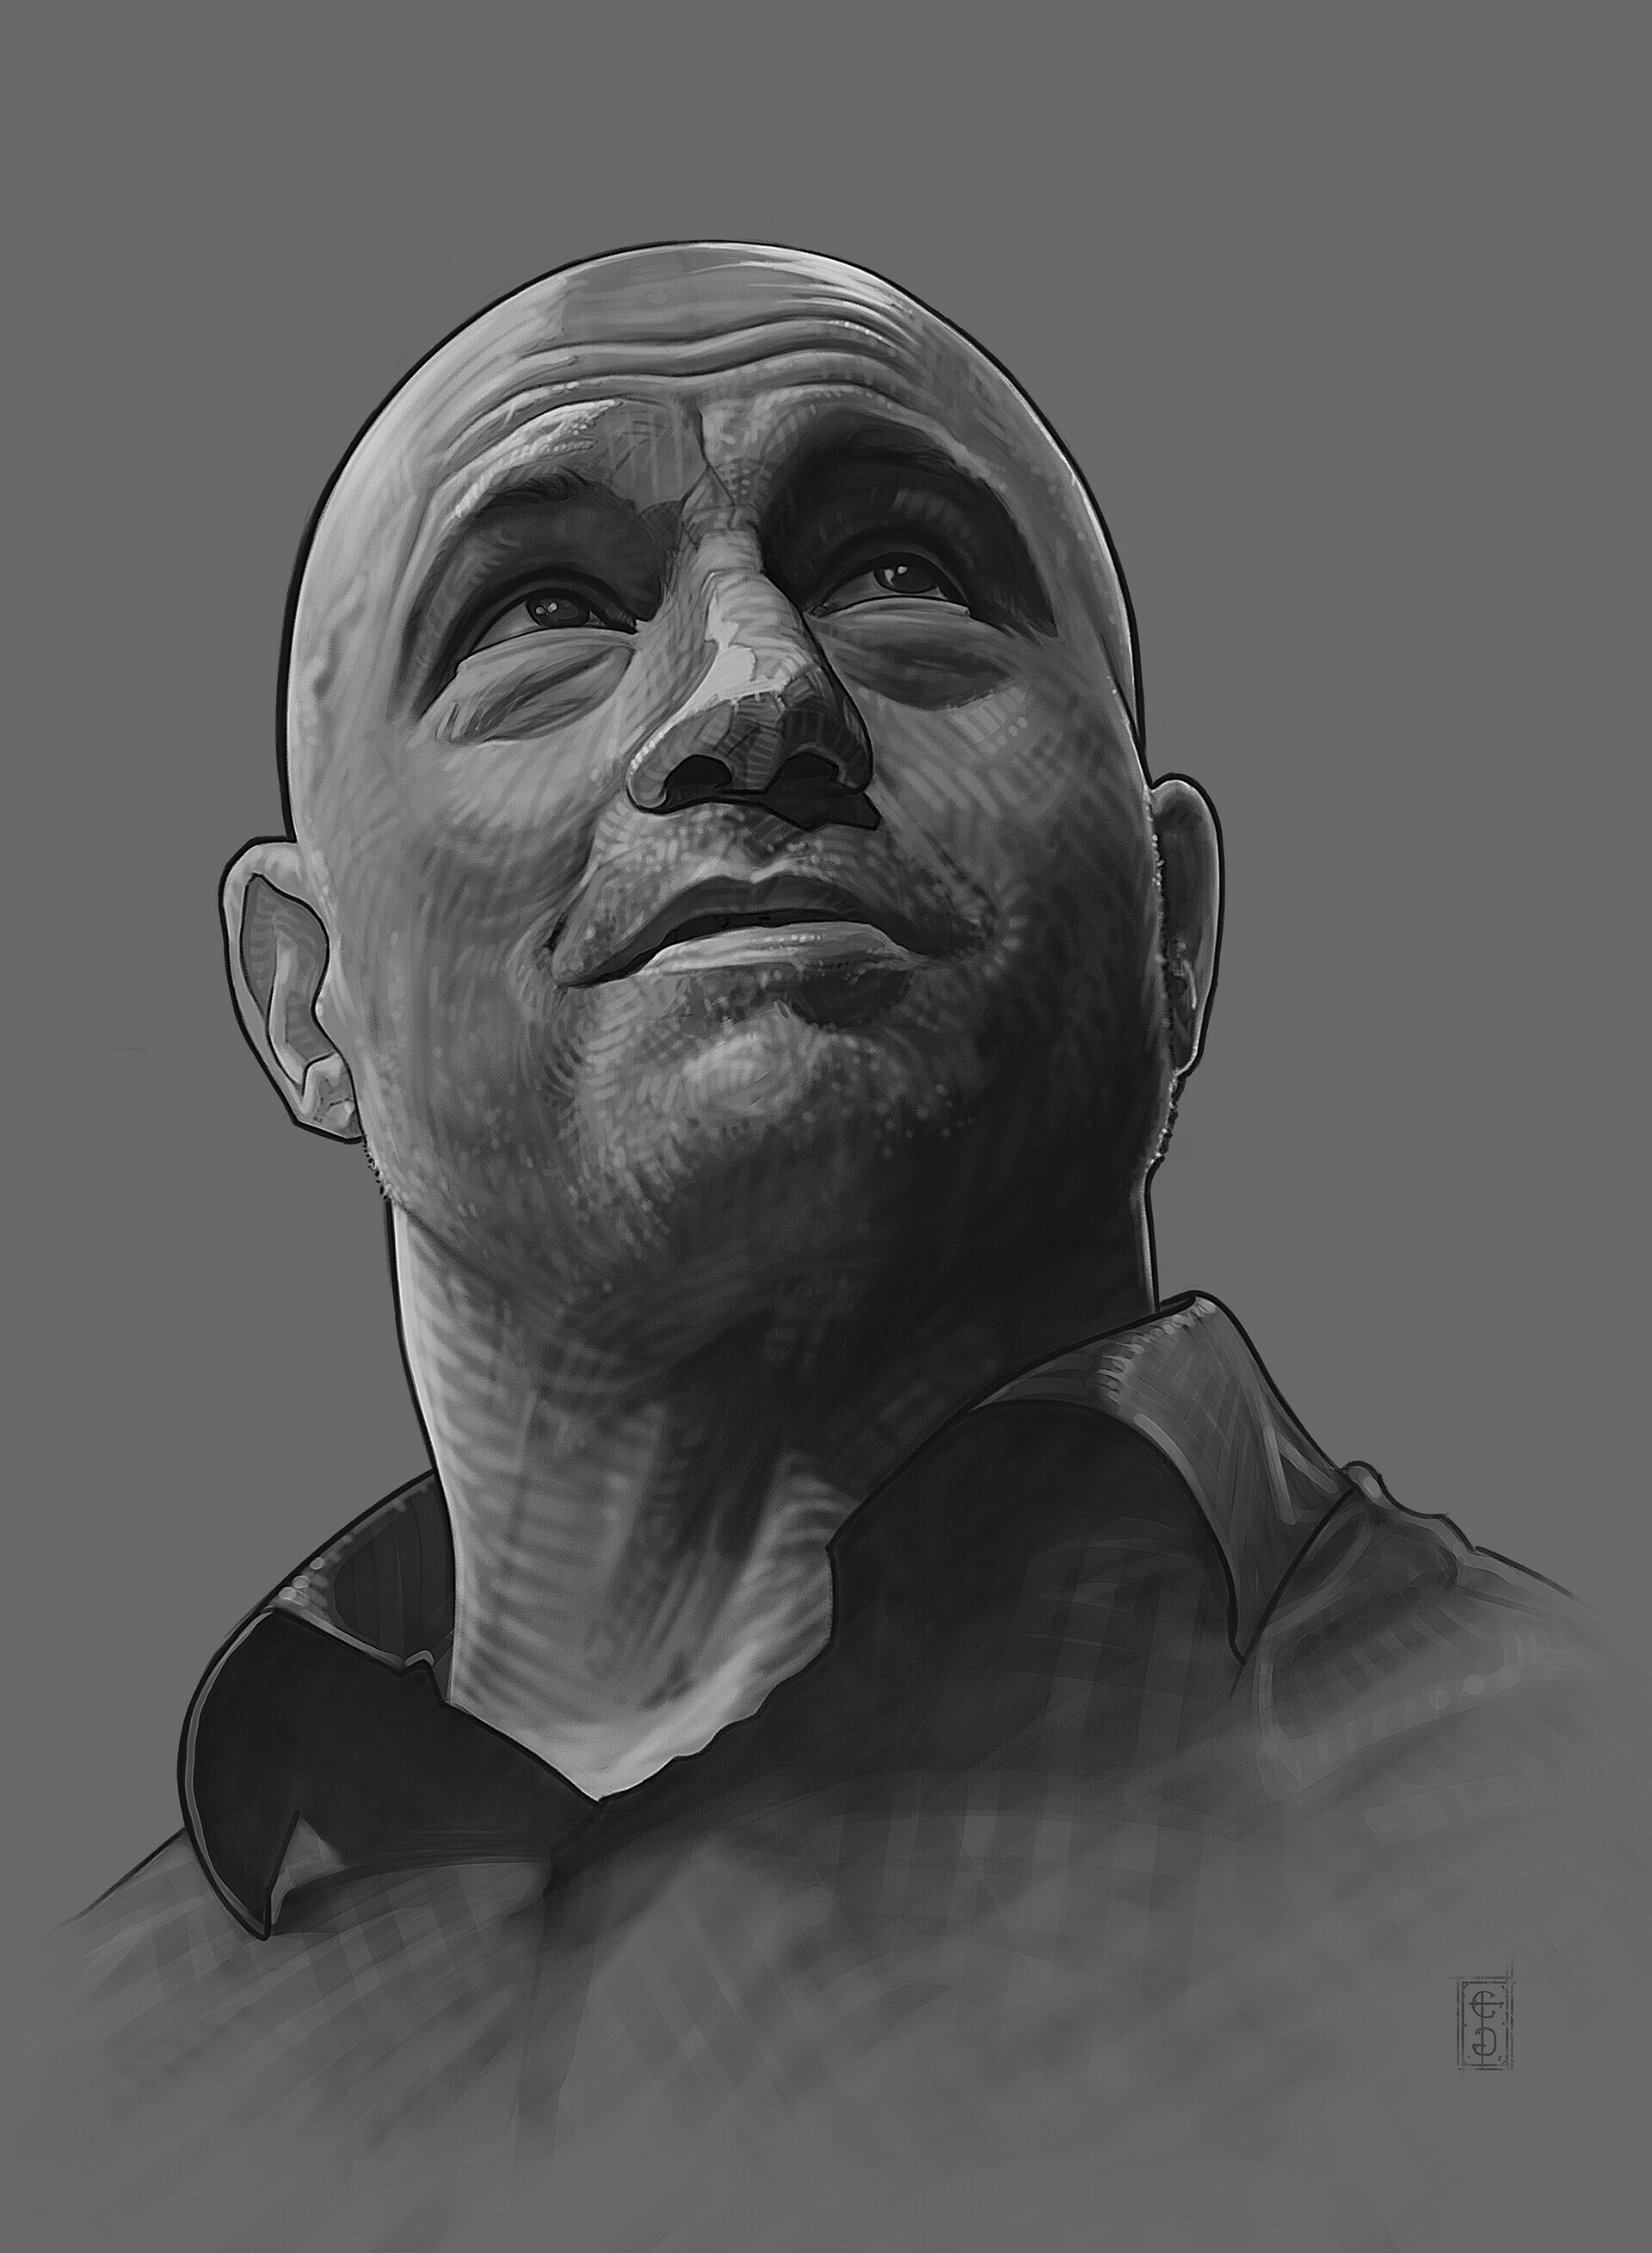 Joe Rogan: Started working for the UFC as an interviewer and color commentator in 1997. 1920x2620 HD Wallpaper.